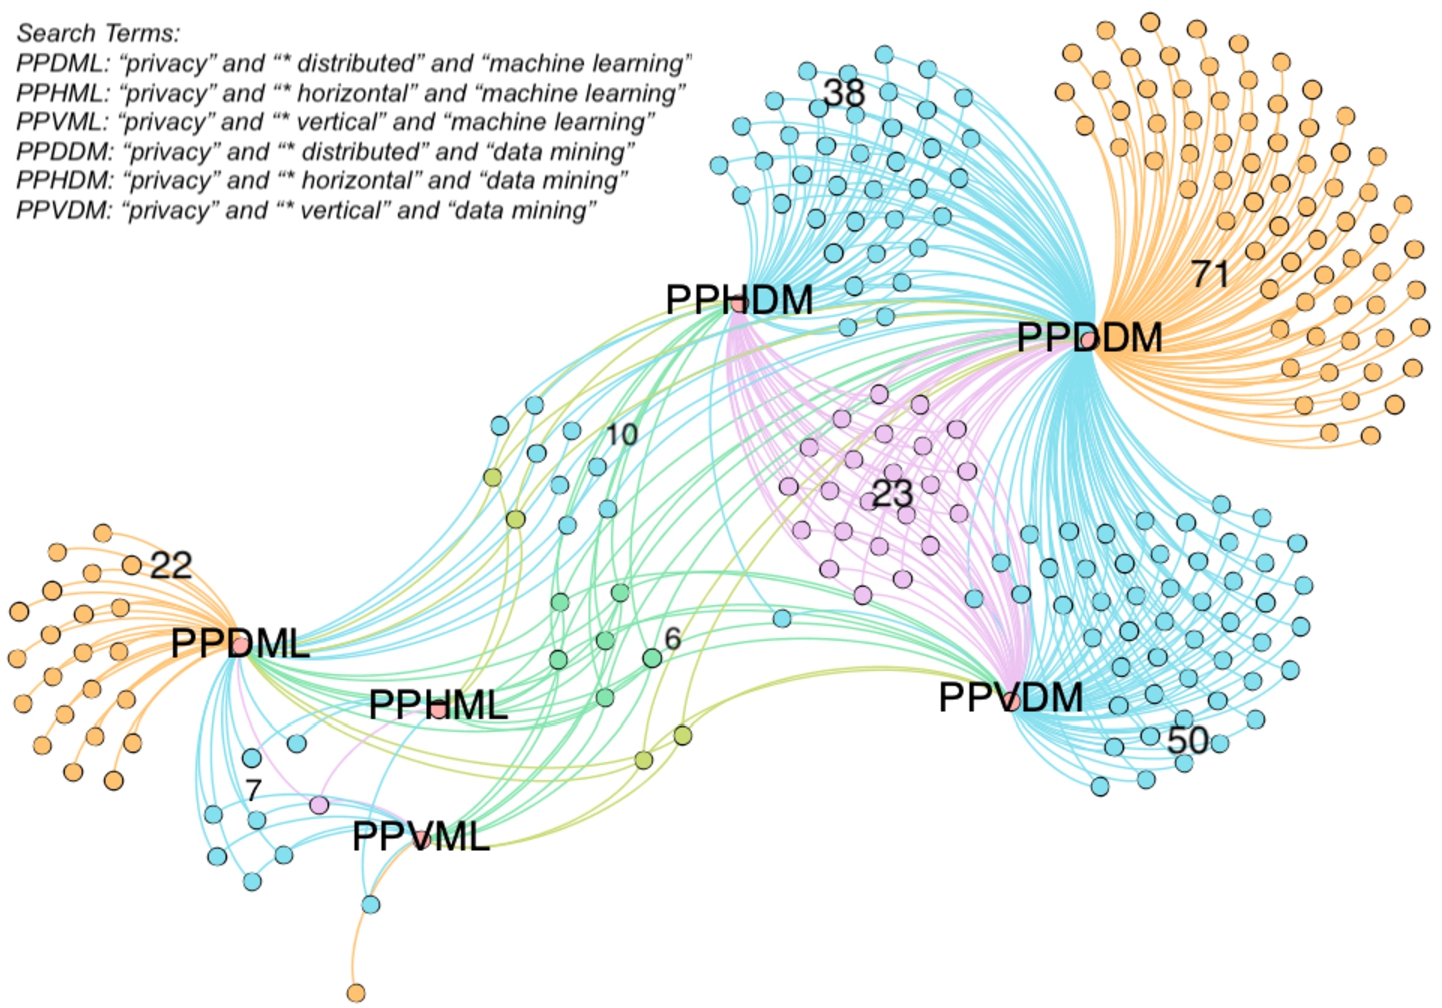 Numbers and clusters of selected papers from different search terms. Papers are presented as nodes and clustered by the search terms. The number of papers in each cluster is labeled in the figure. The edges show which search terms were used to find the papers. For example, the 23 nodes in the purple cluster were found from using search terms PPDDM, PPHDM, and PPVDM.